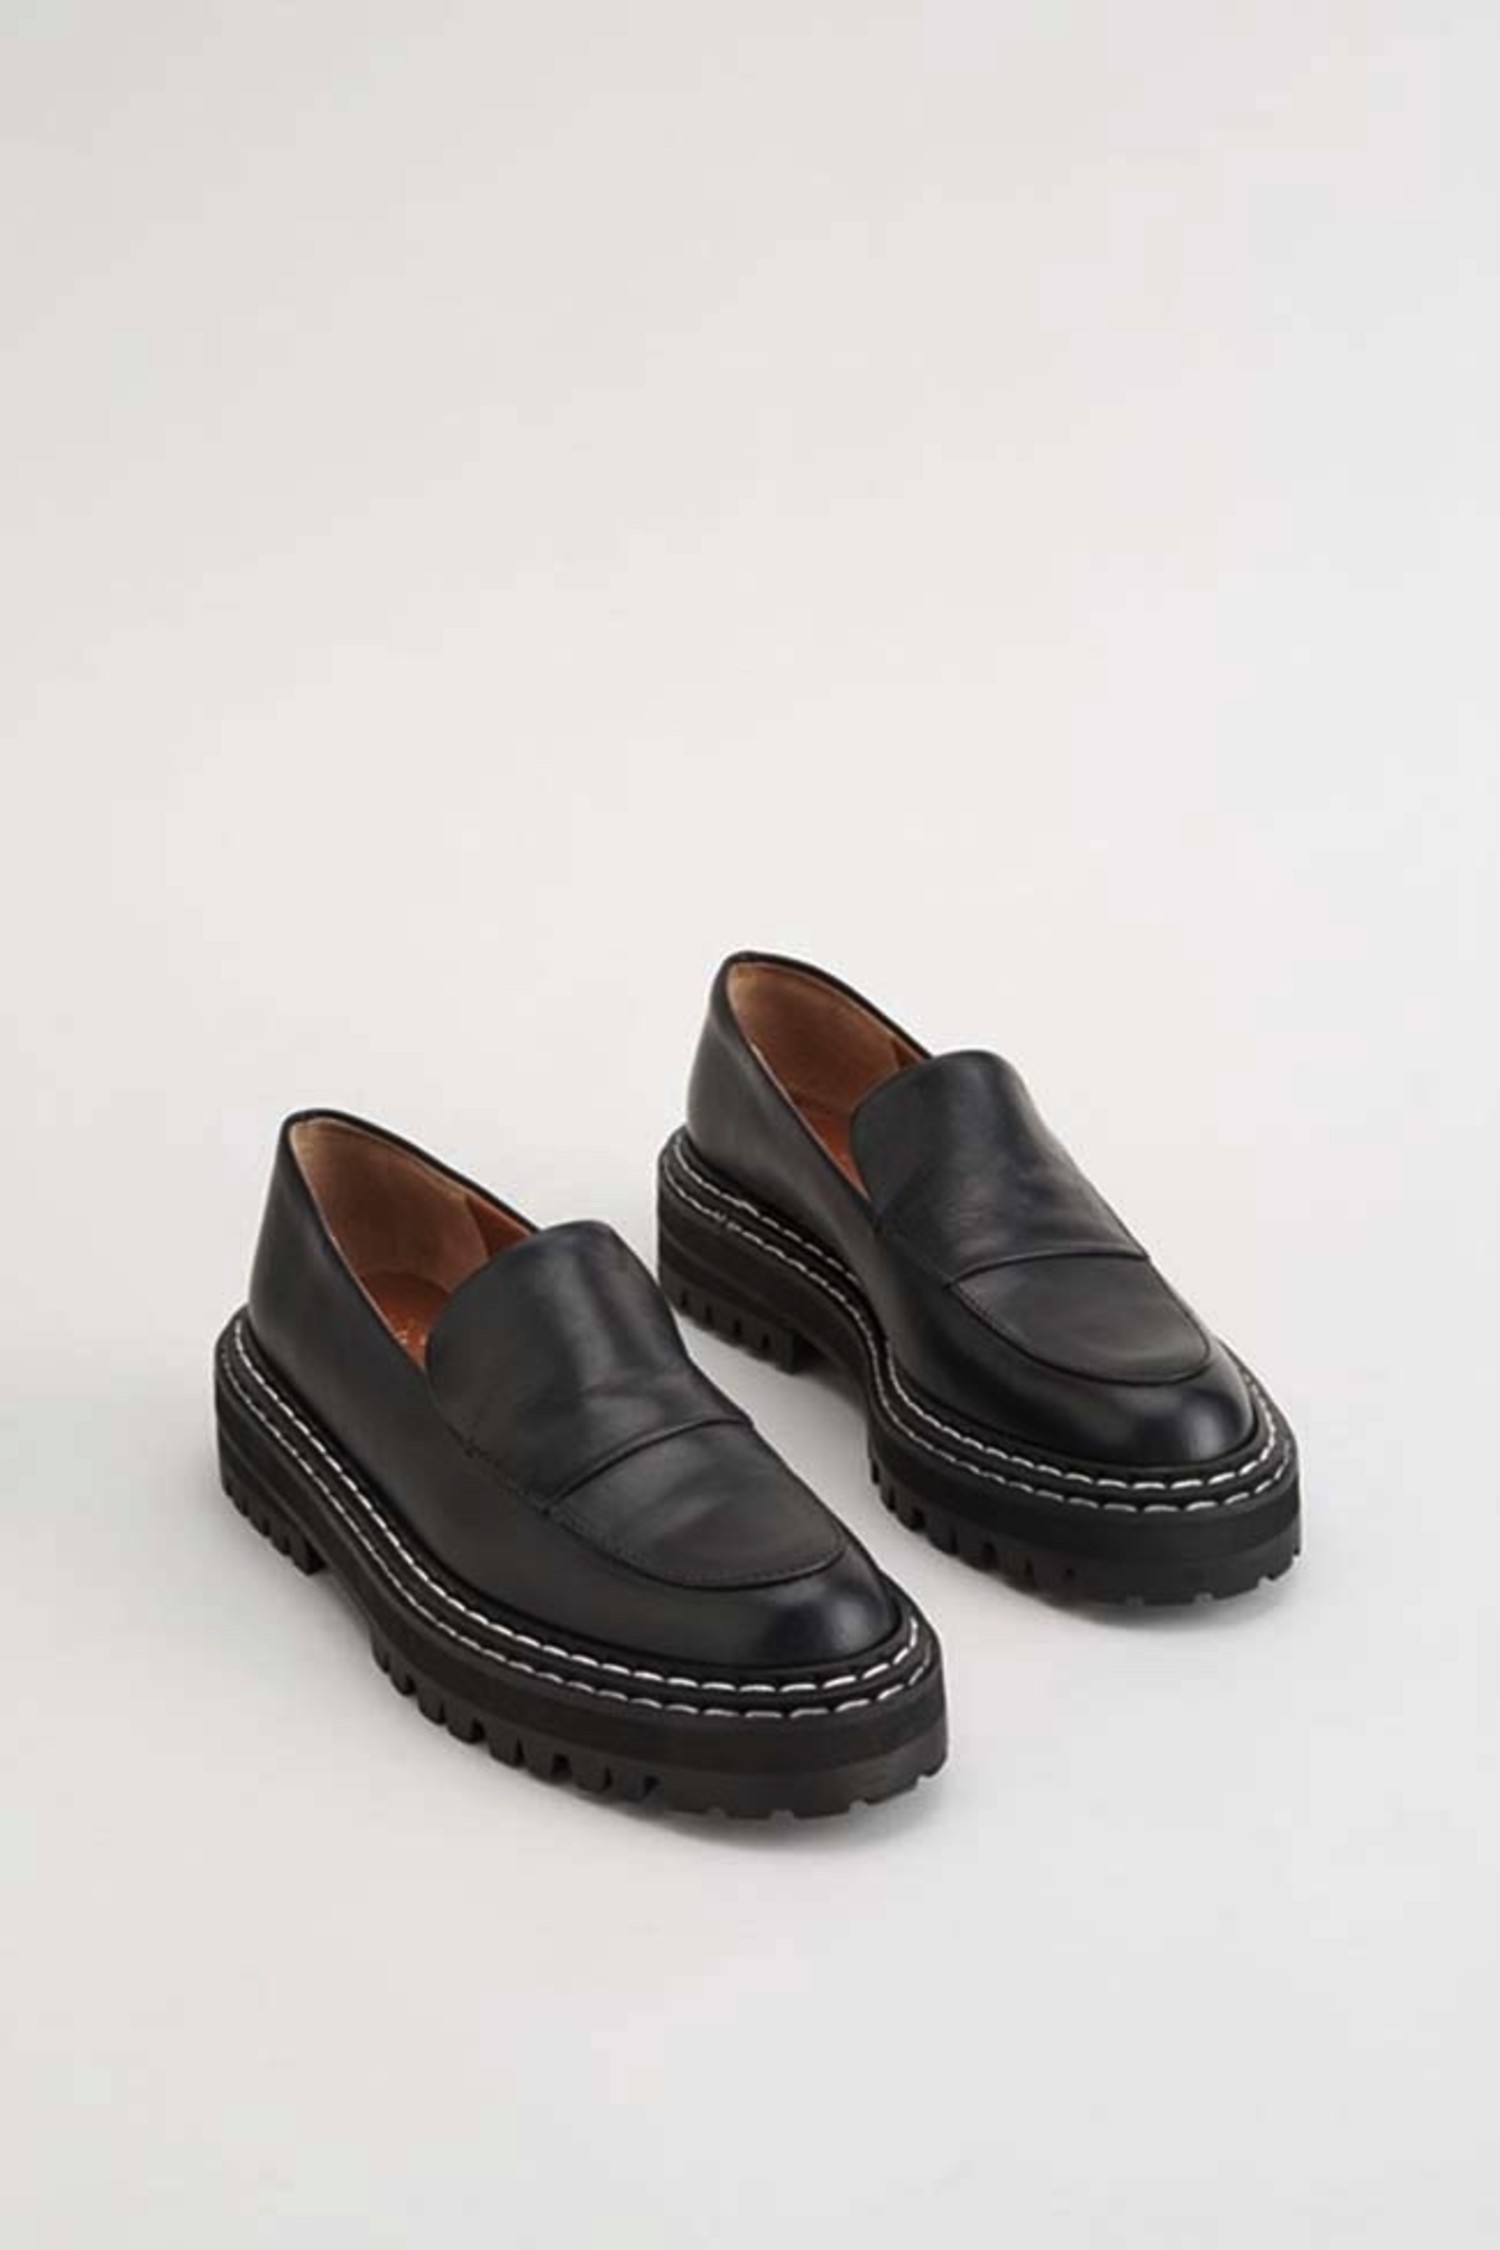 chunky loafer shoes